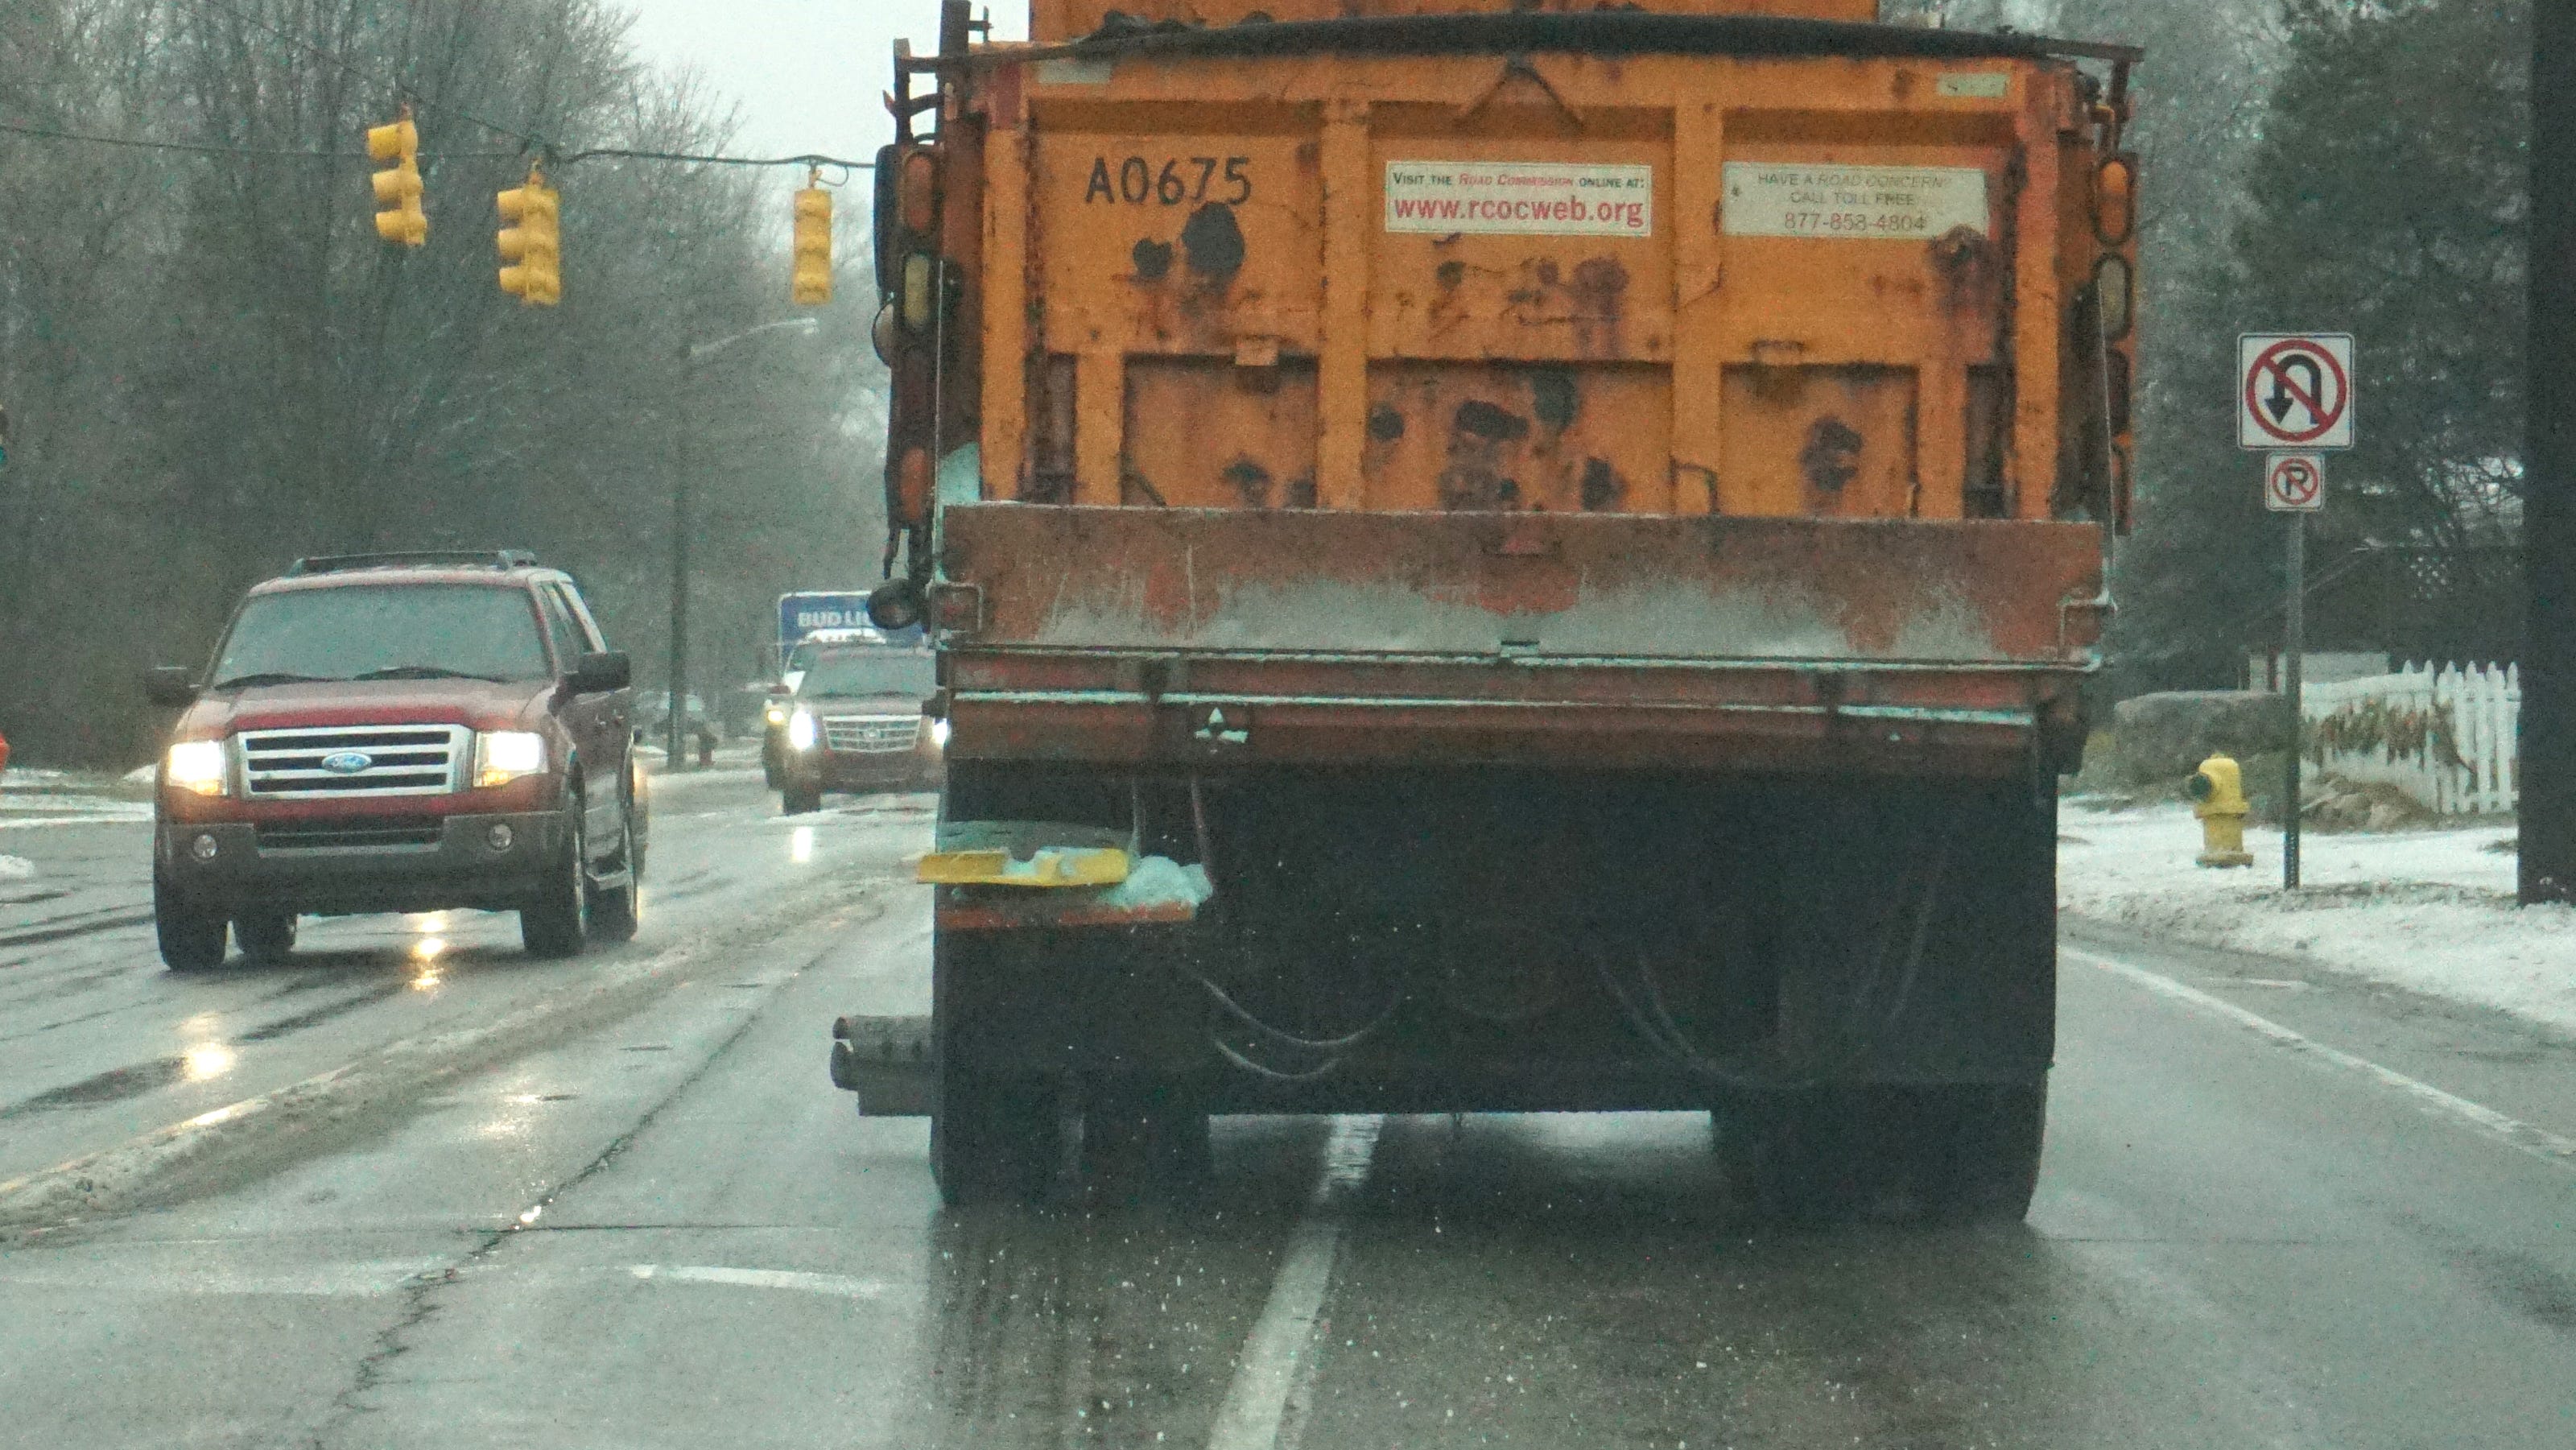 Heavy road salt use in winter is a growing problem, scientists say - USA TODAY